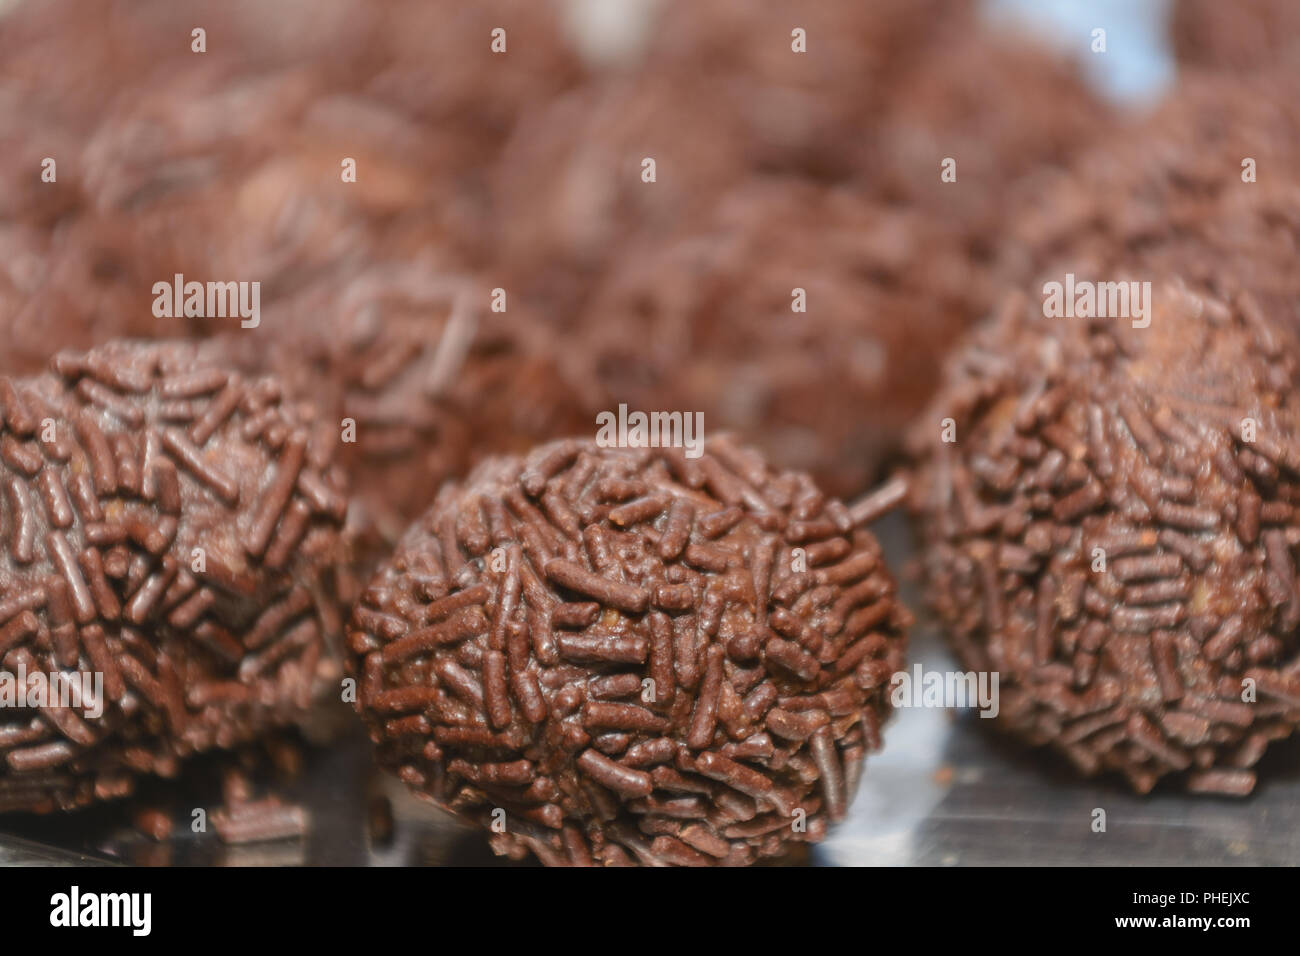 Homemade delicious nougat balls - close-up and depth of field Stock Photo